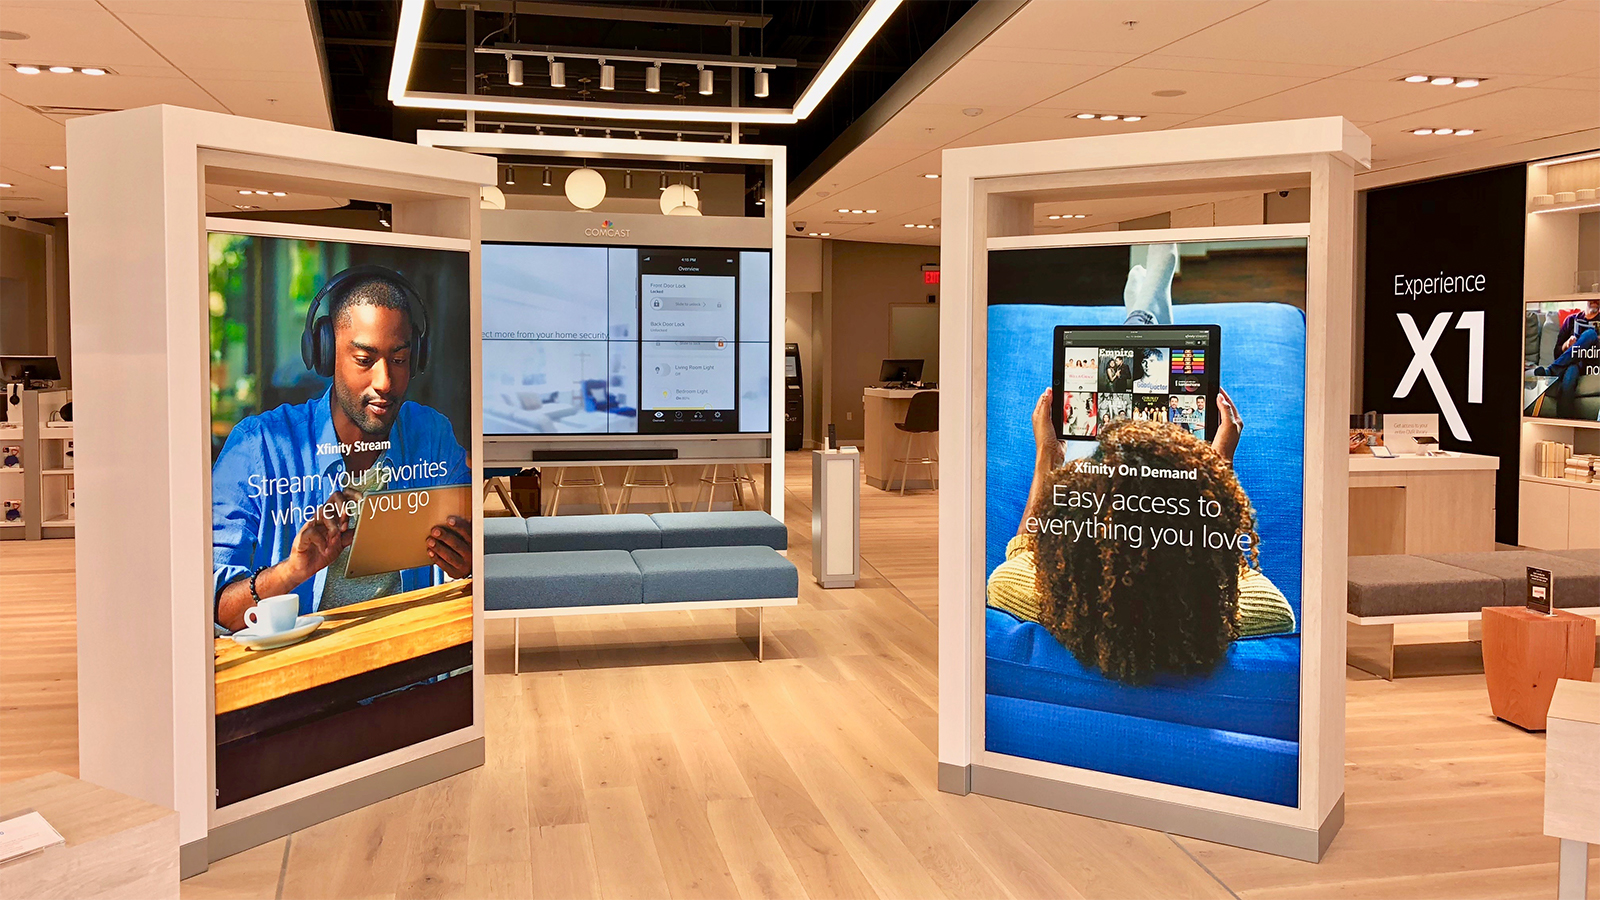 Interior of an Xfinity Retail Store.